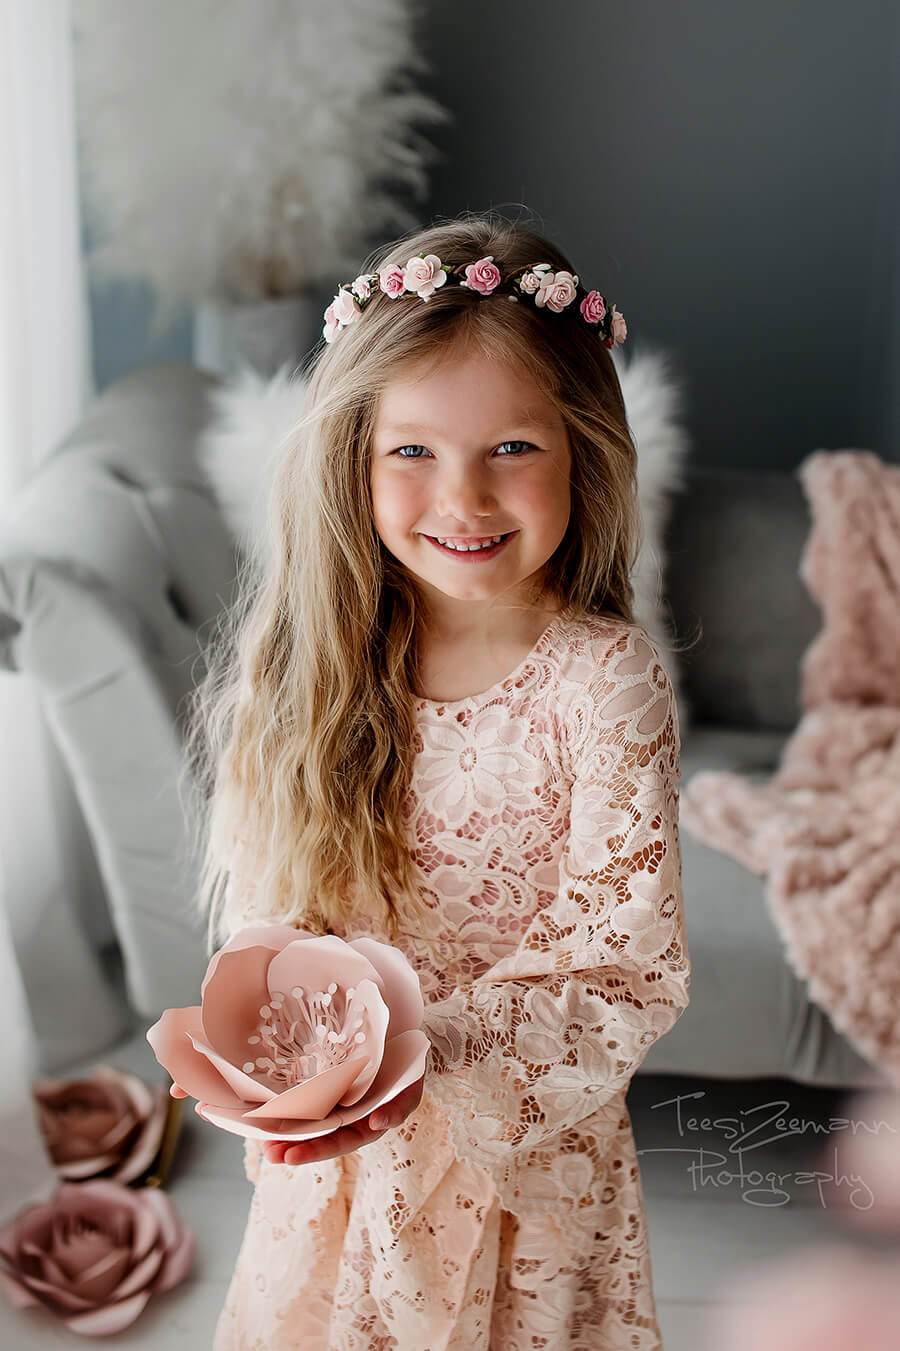 Flower Girl Formal Dresses for a Wedding Party - MAY I SUGGEST THESE TIPS